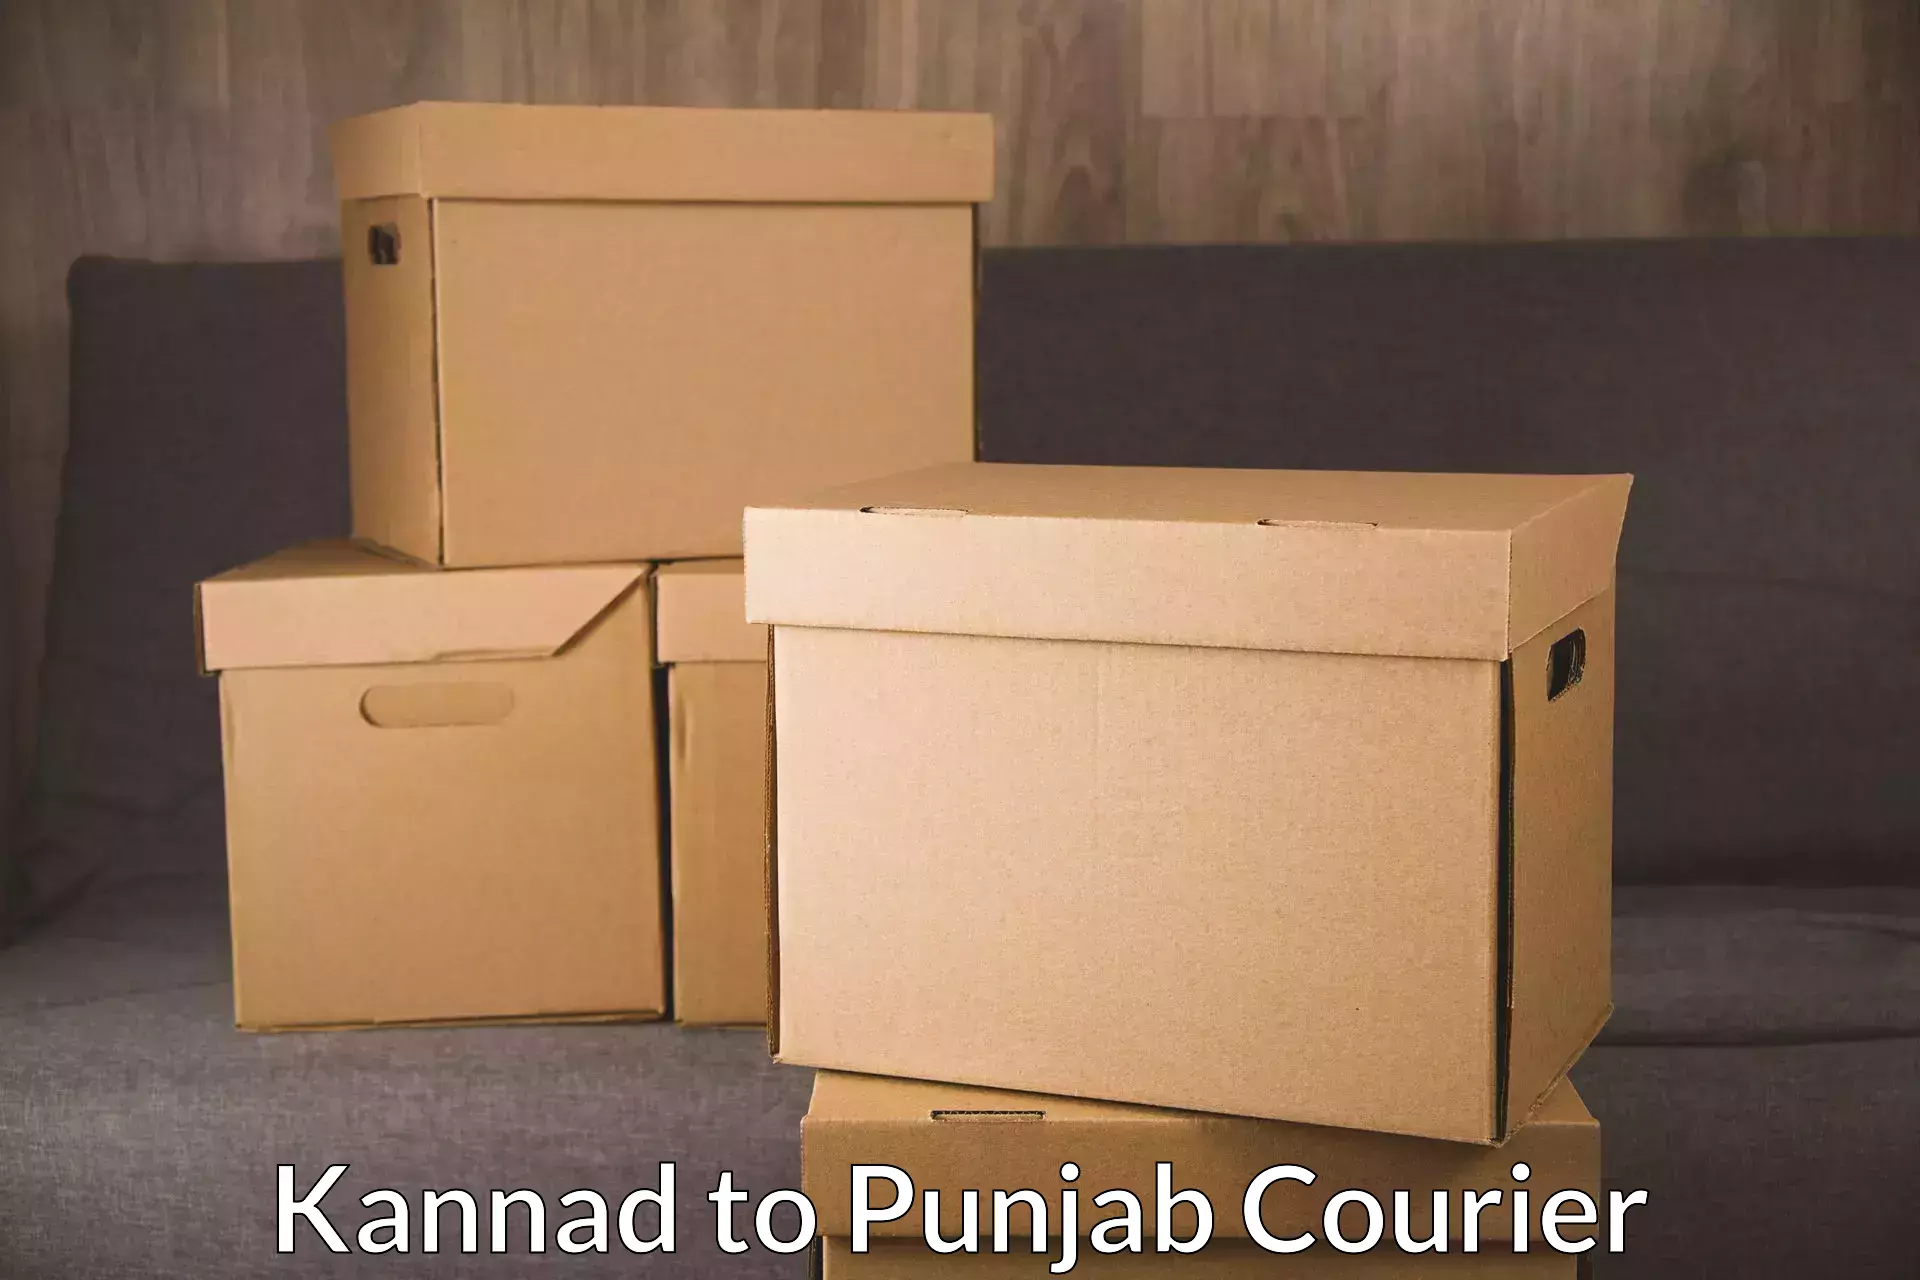 End-to-end delivery in Kannad to Punjab